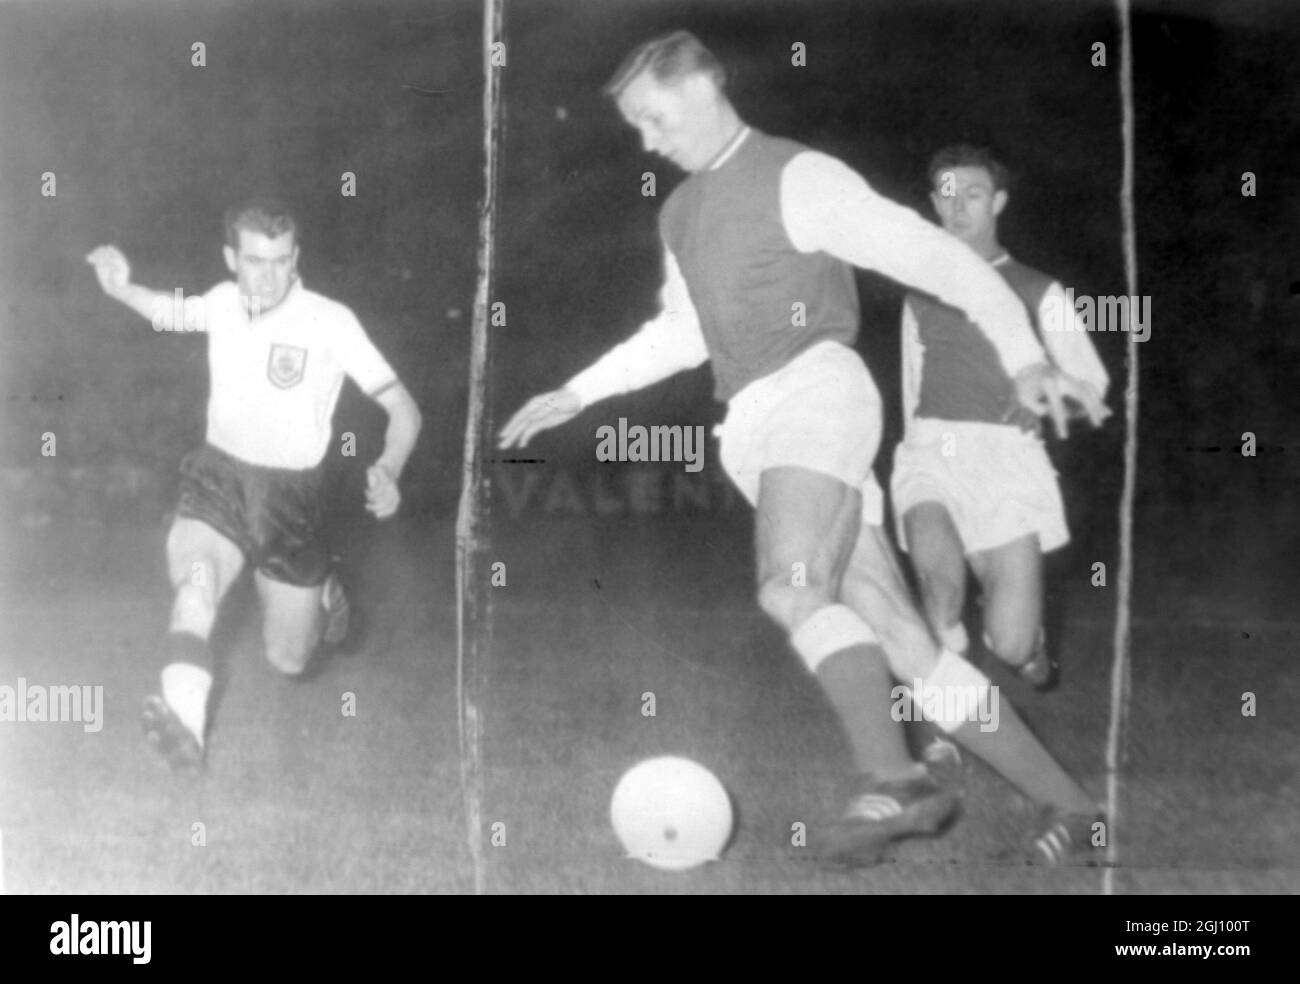 FOOTBALL BURNLEY V REIMS CONELLY LEADS ATTACK 30 NOVEMBER 1960 Stock Photo